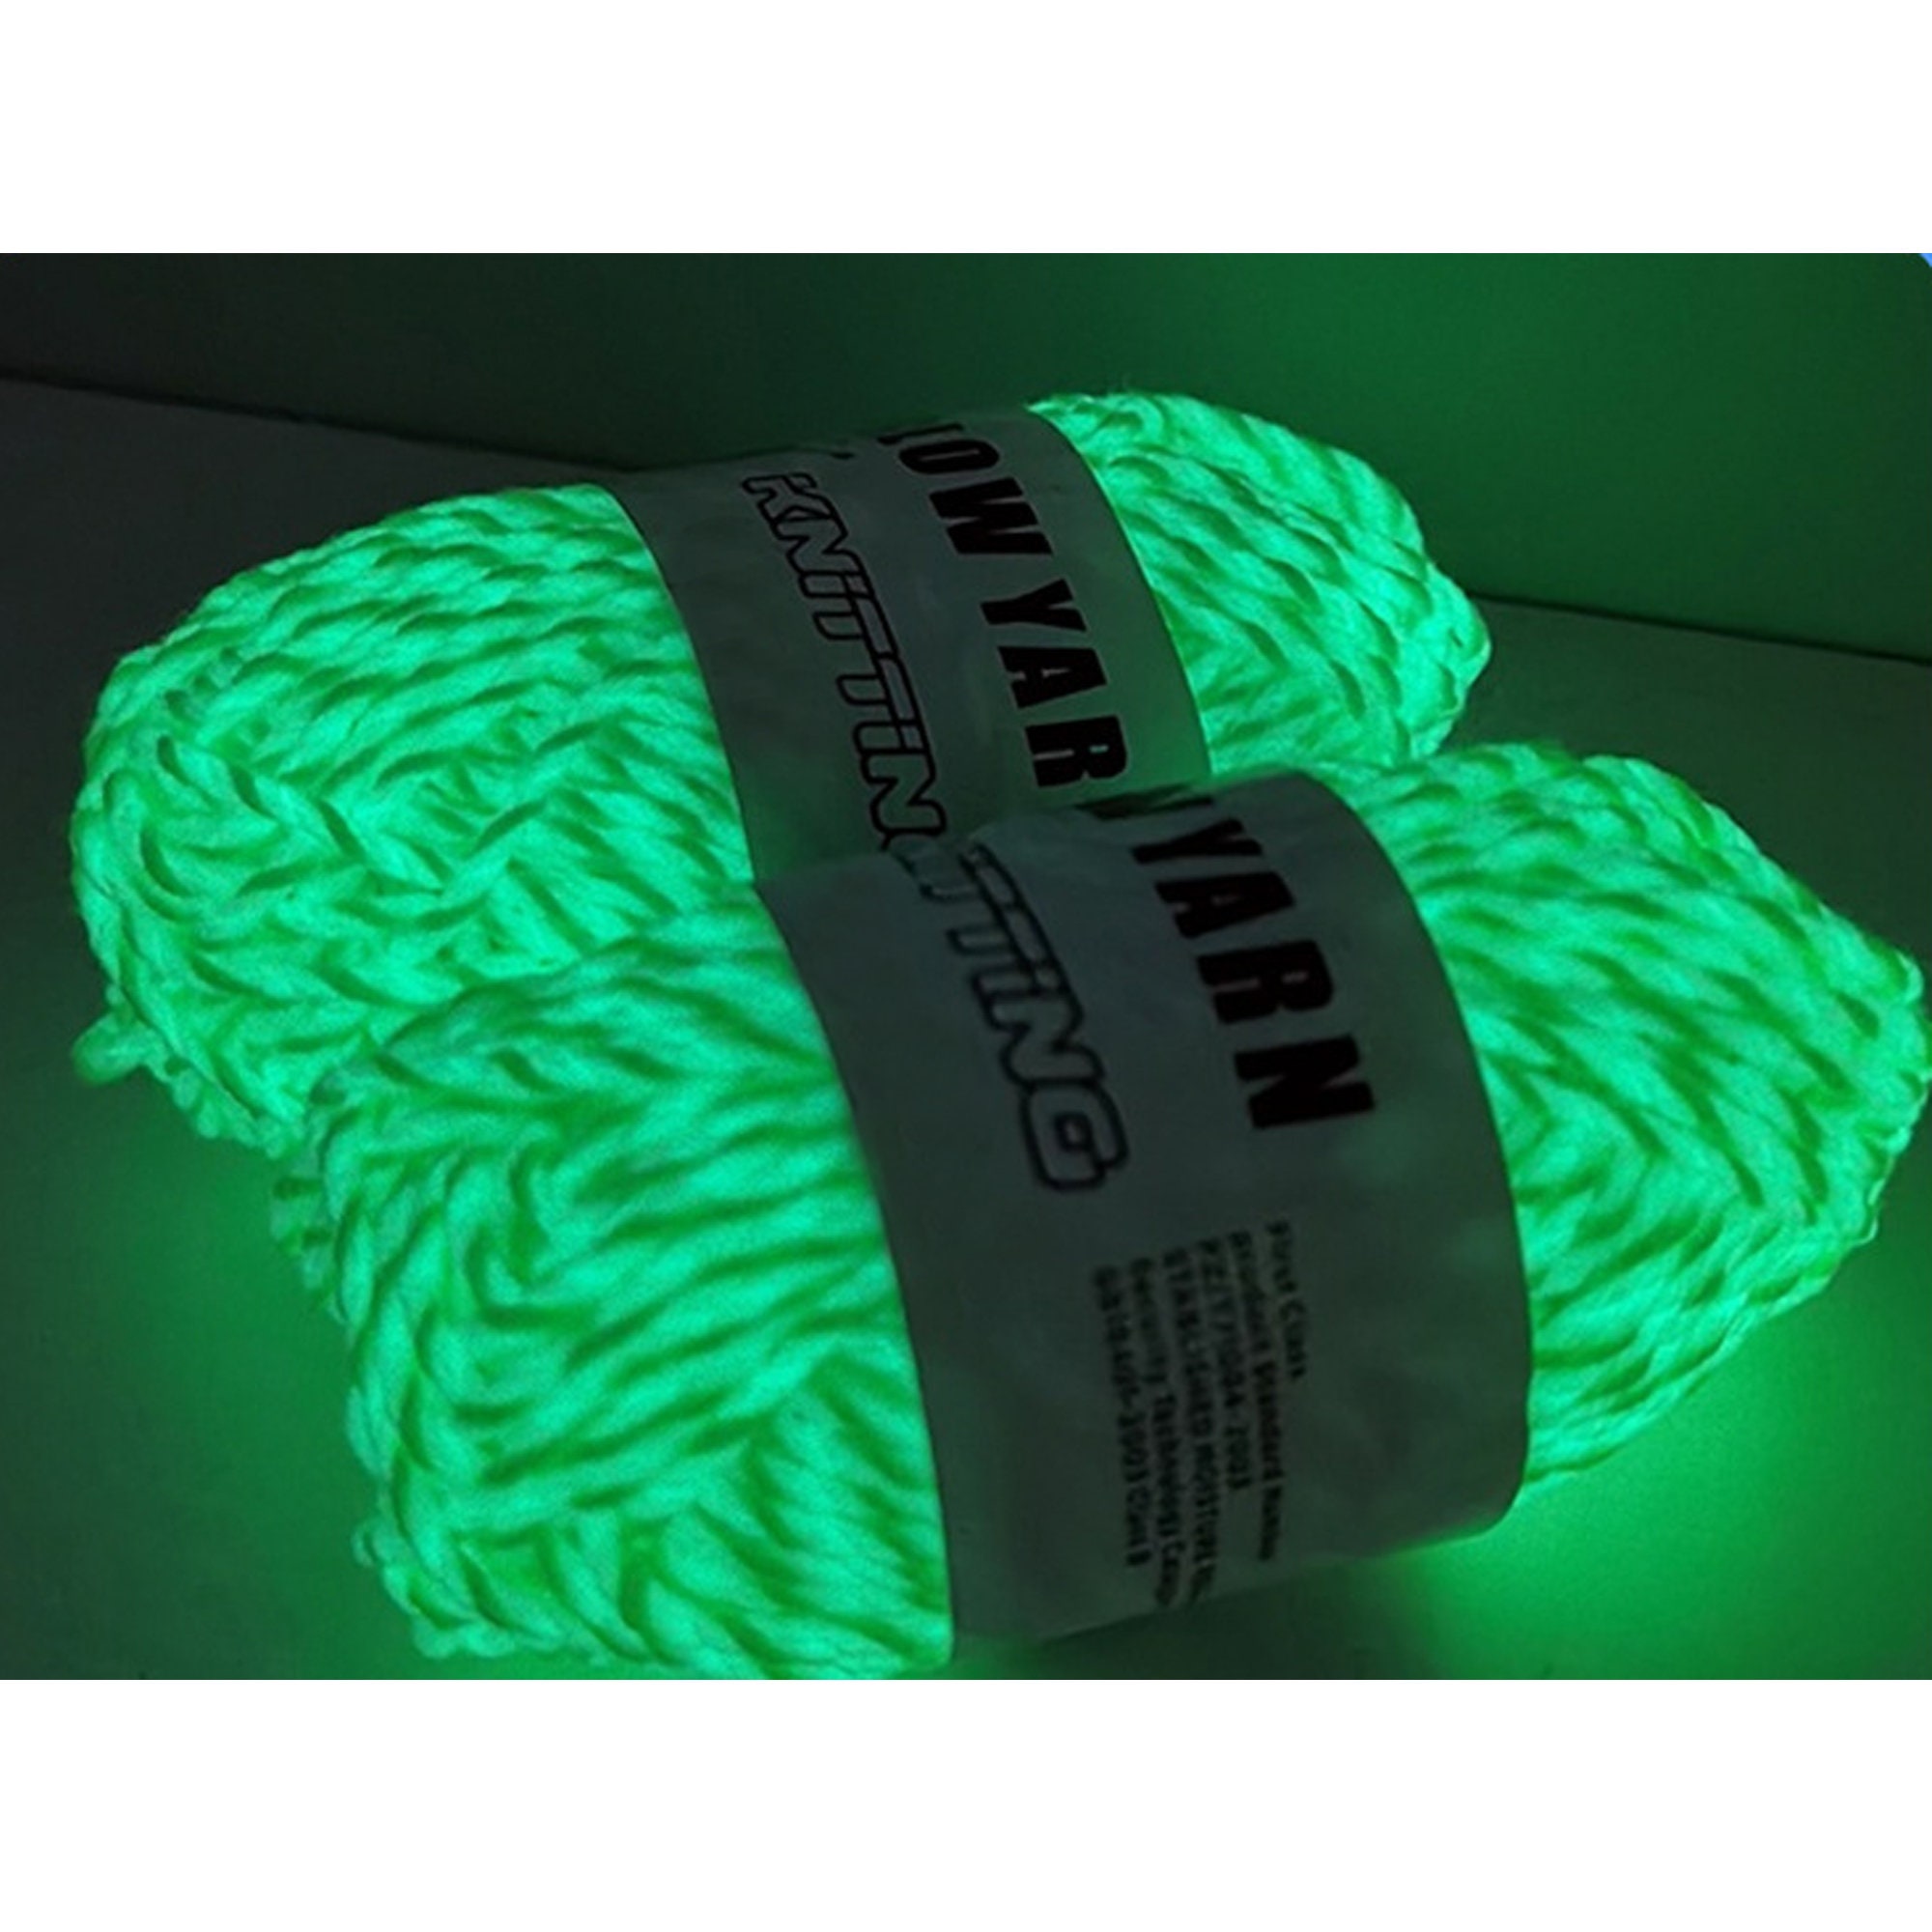 4 Pcs Glow In The Dark Yarn, Sewing Supplies,(50m) For Crocheting For Diy  Arts, Crafts & Sewing Beginners